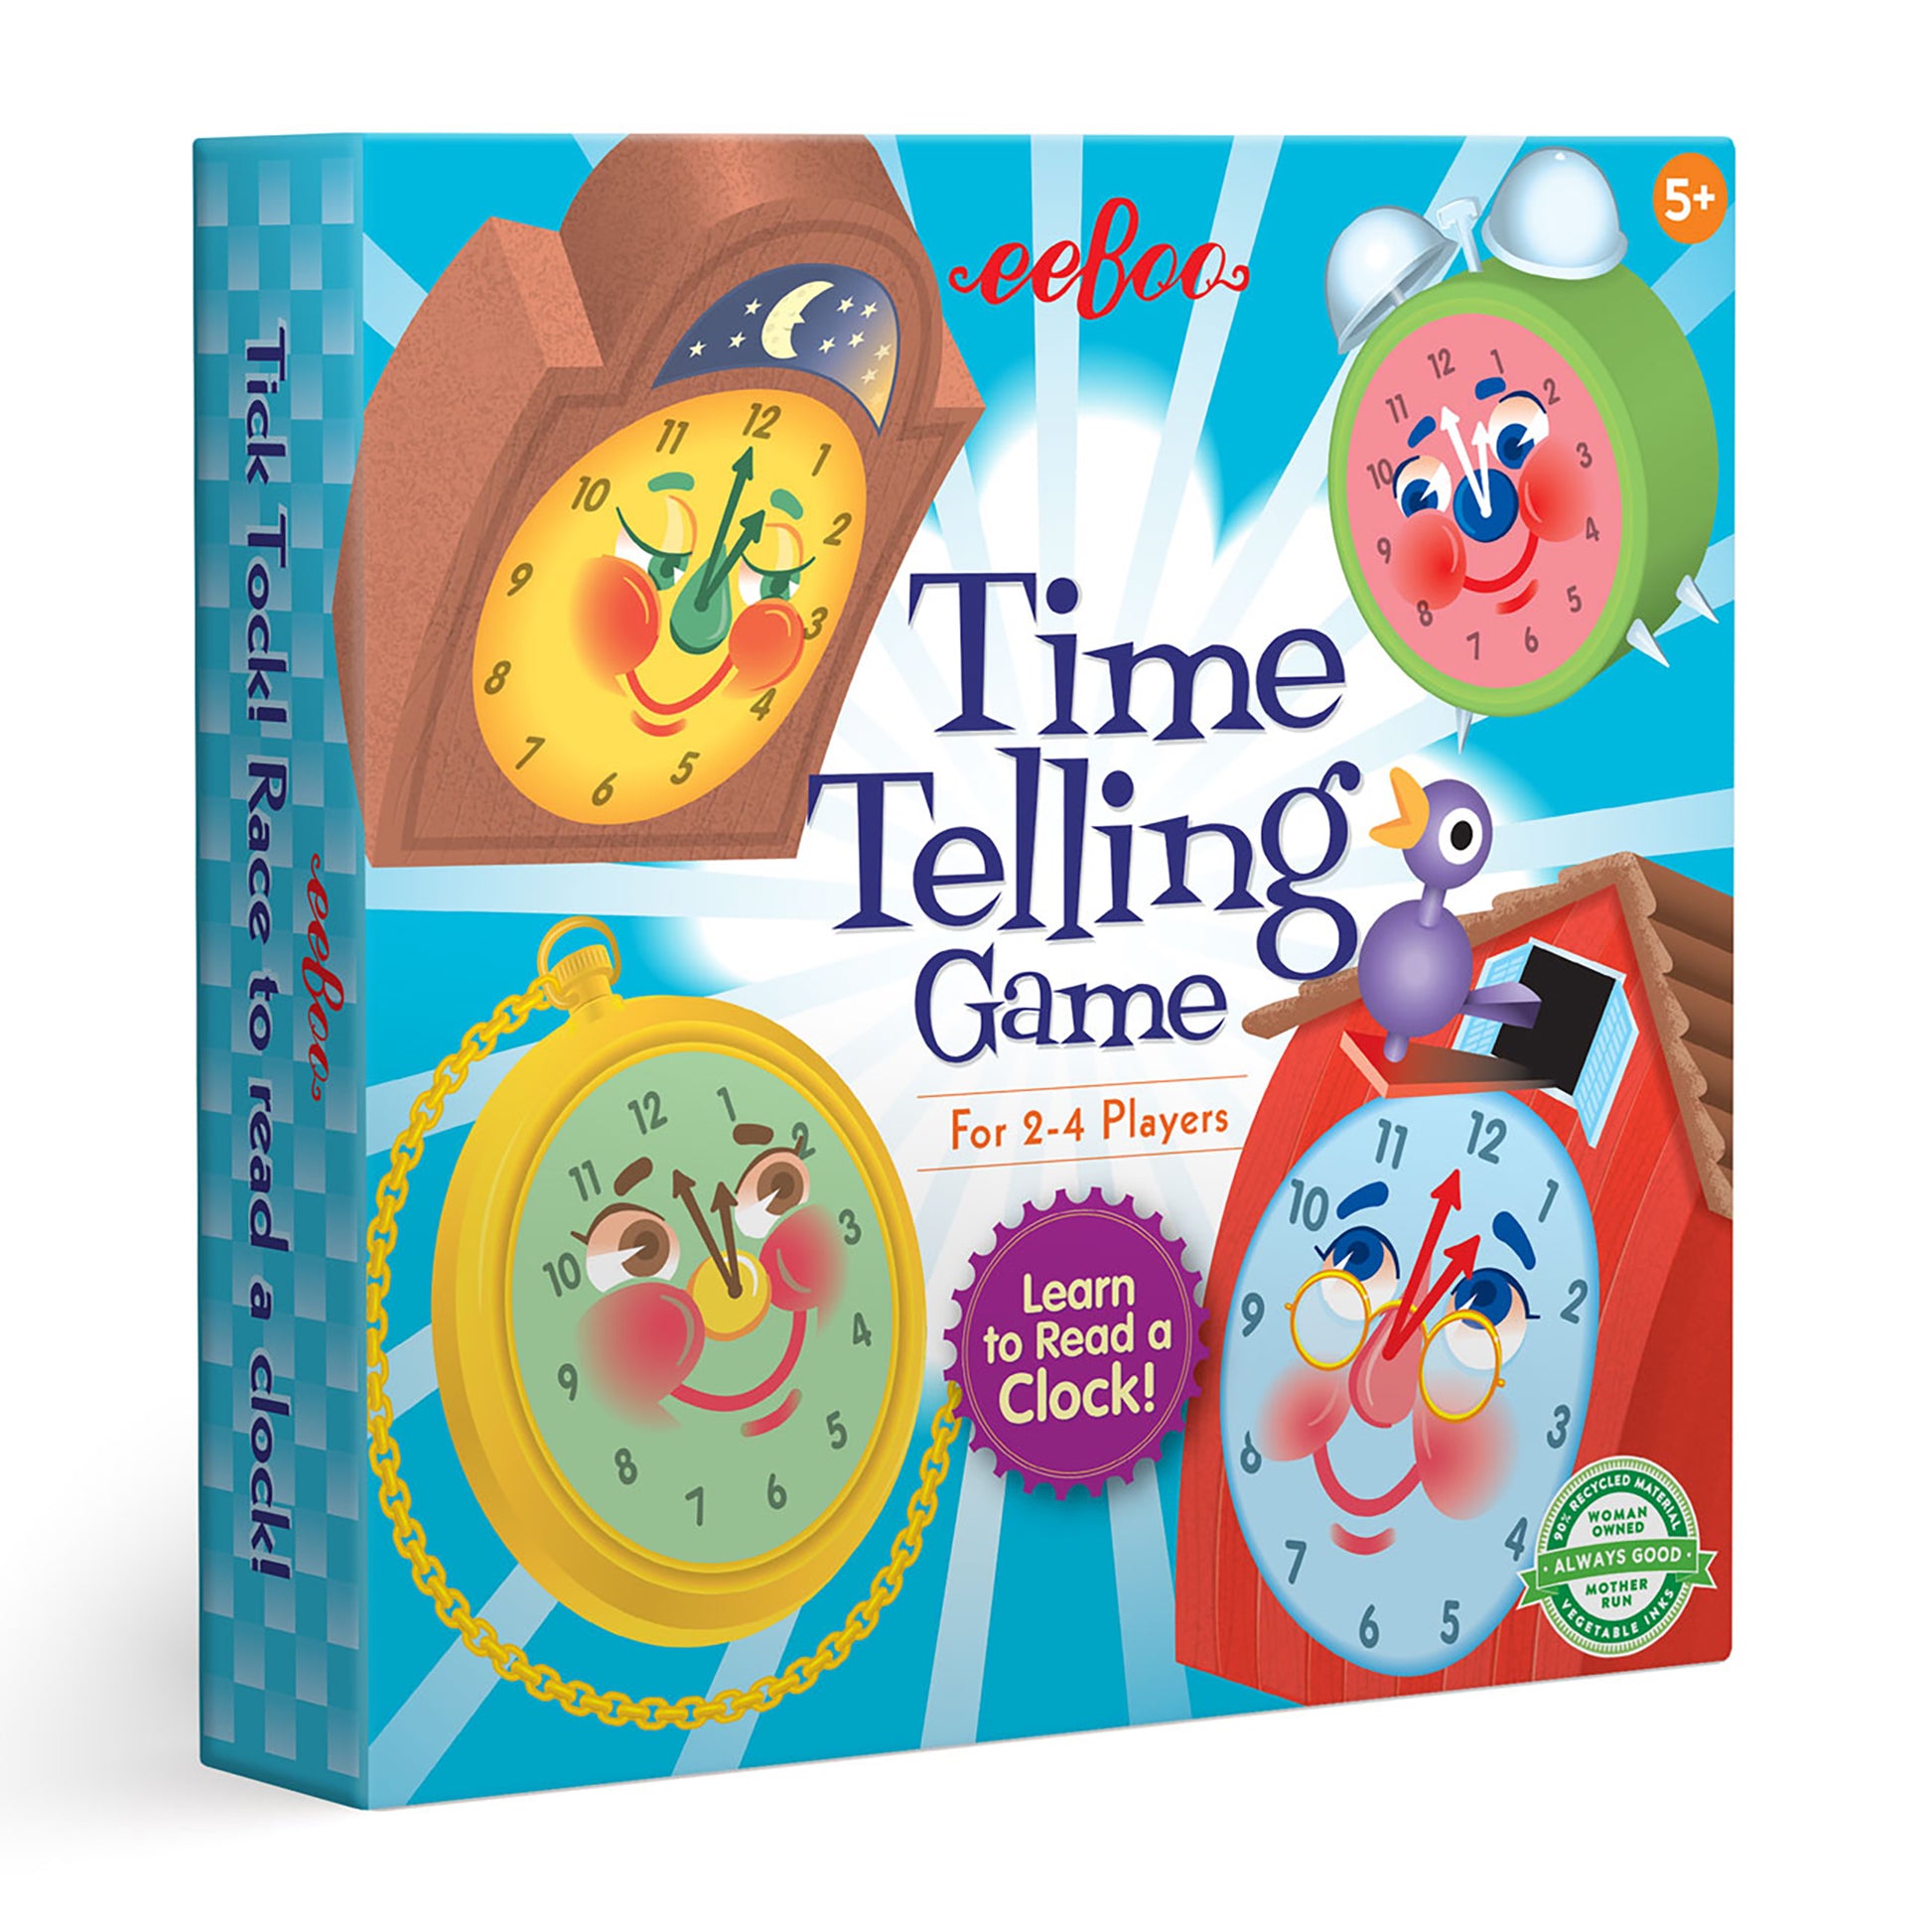 Time Telling Learn to Read a Clock Award Winning Game by eeBoo Kids 5+